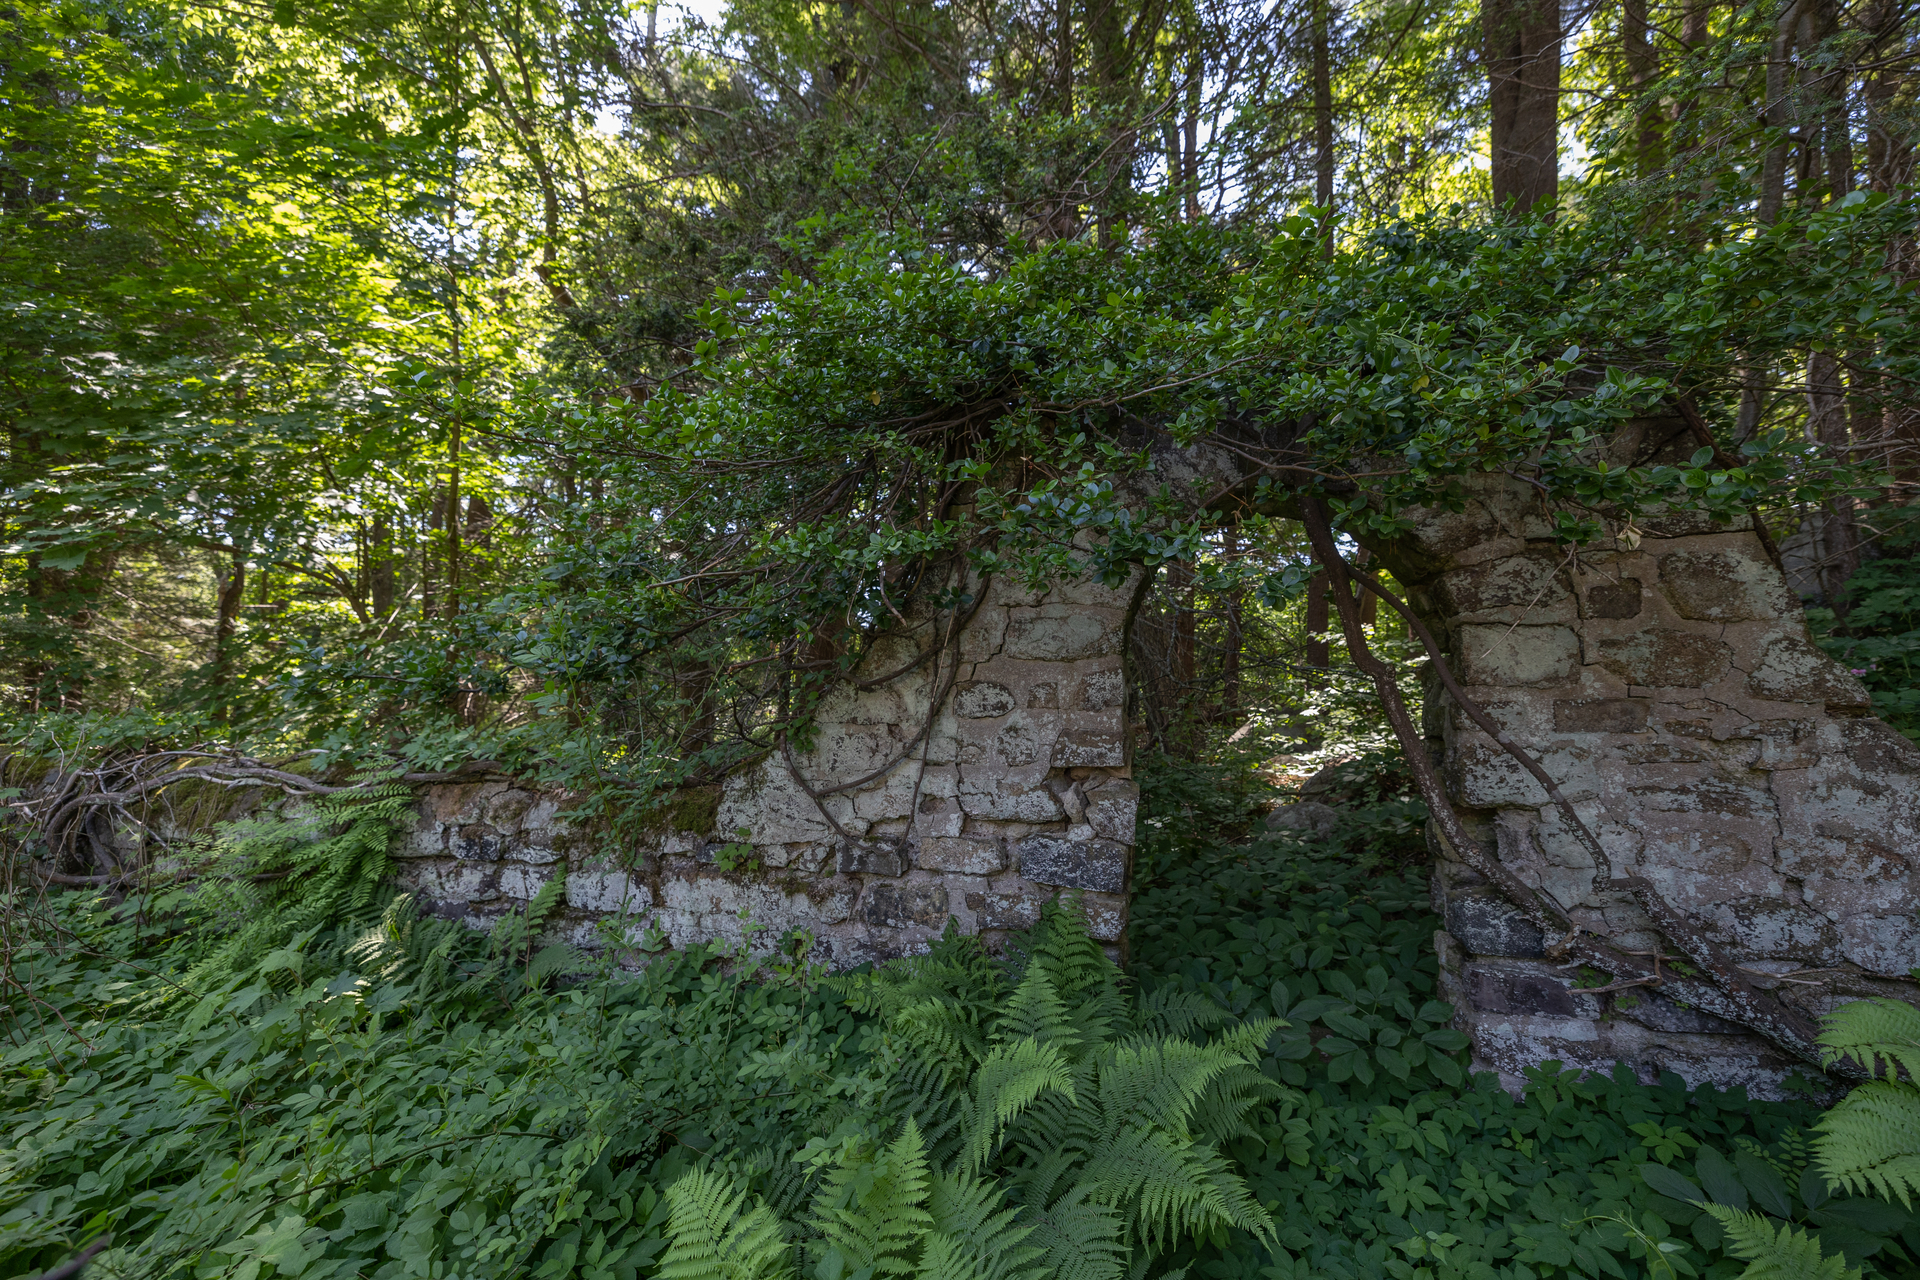 A crumbling stone archway leading into a forest. On top of the rocks is green vine plants and below are ferns and other short plants.